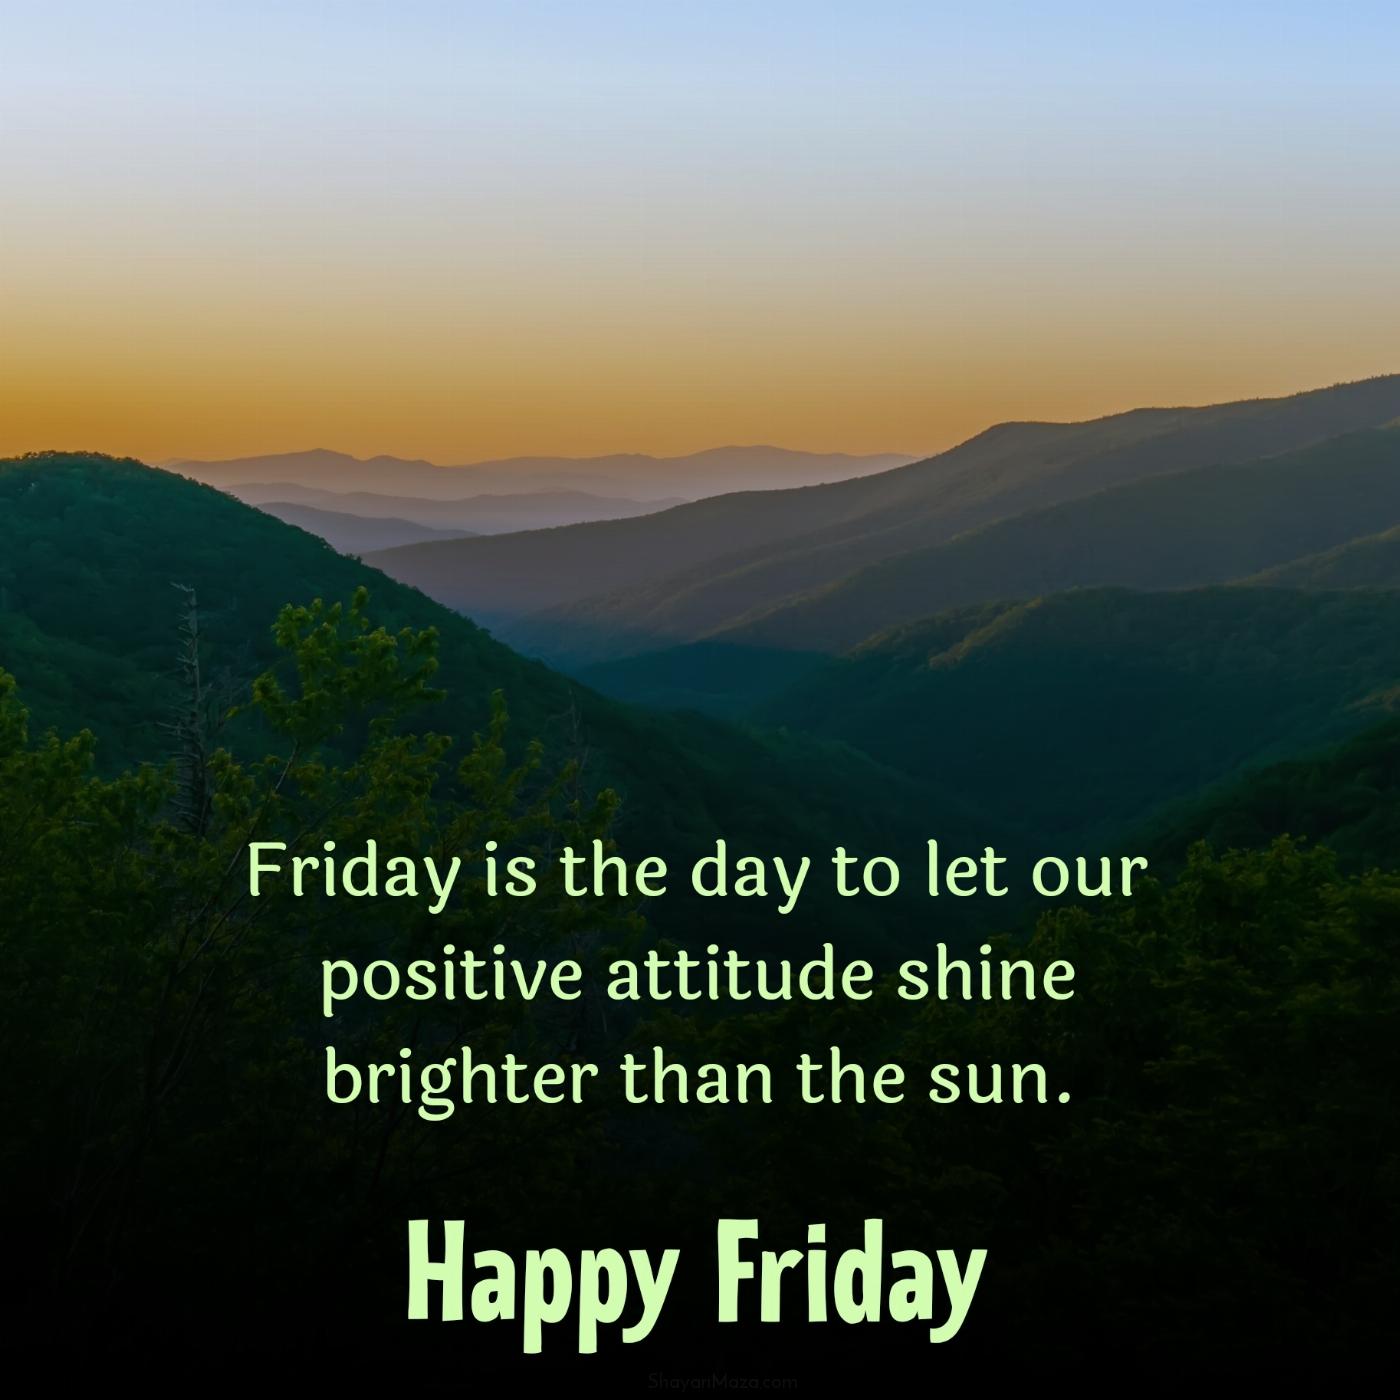 Friday is the day to let our positive attitude shine brighter